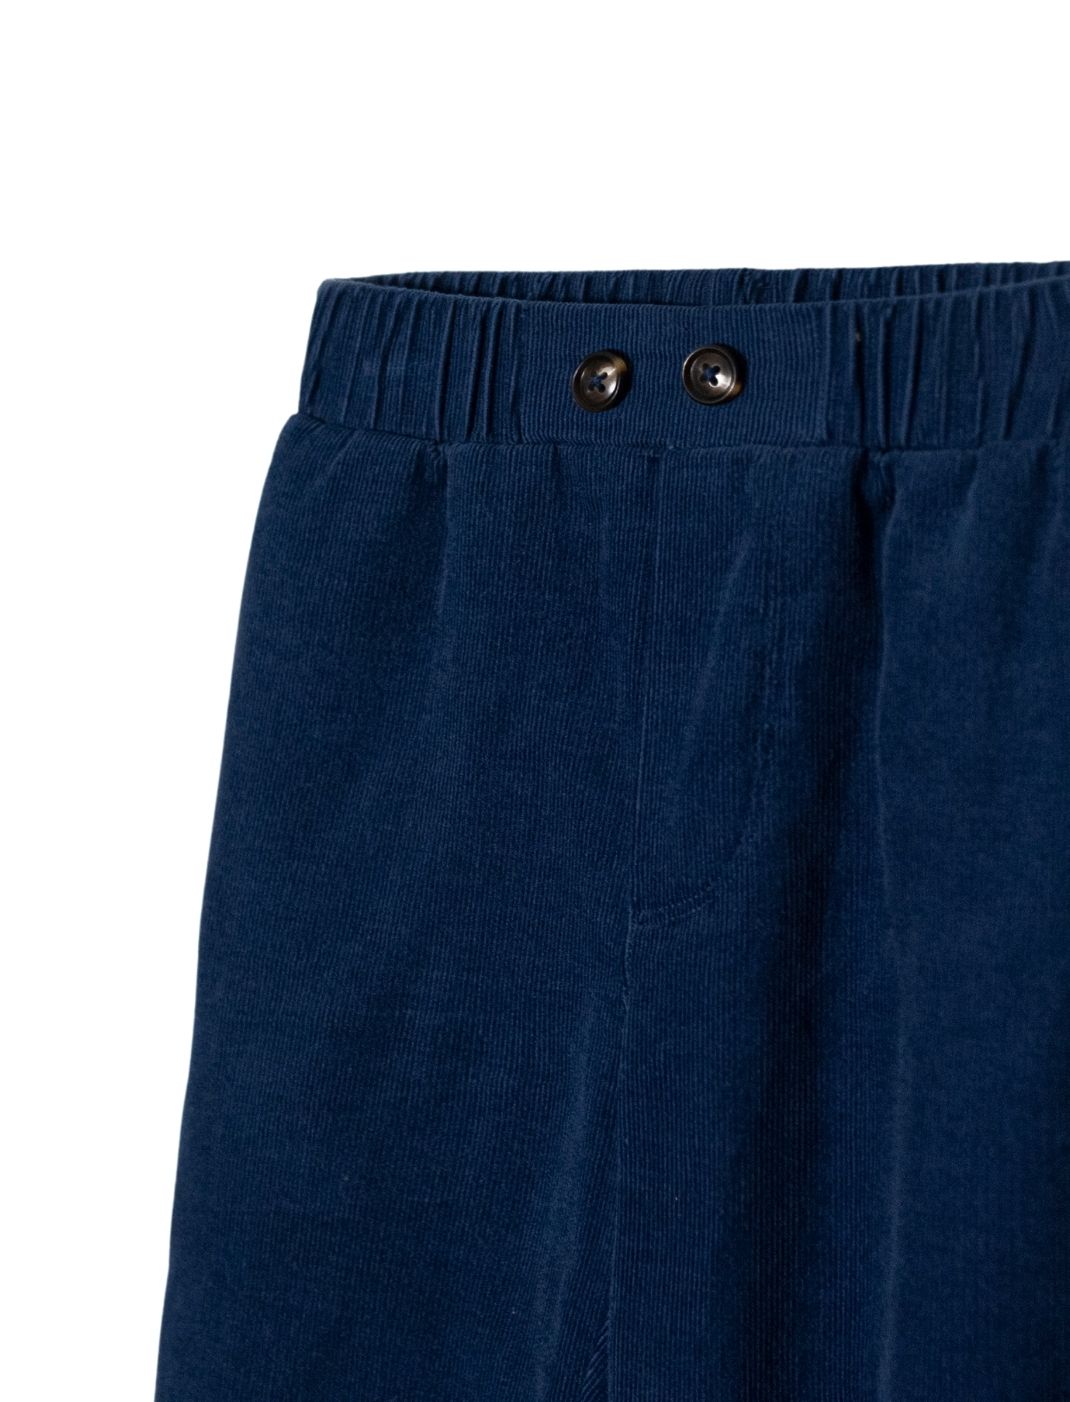 Detail shot of boys blue pants and elastic waist with buttons